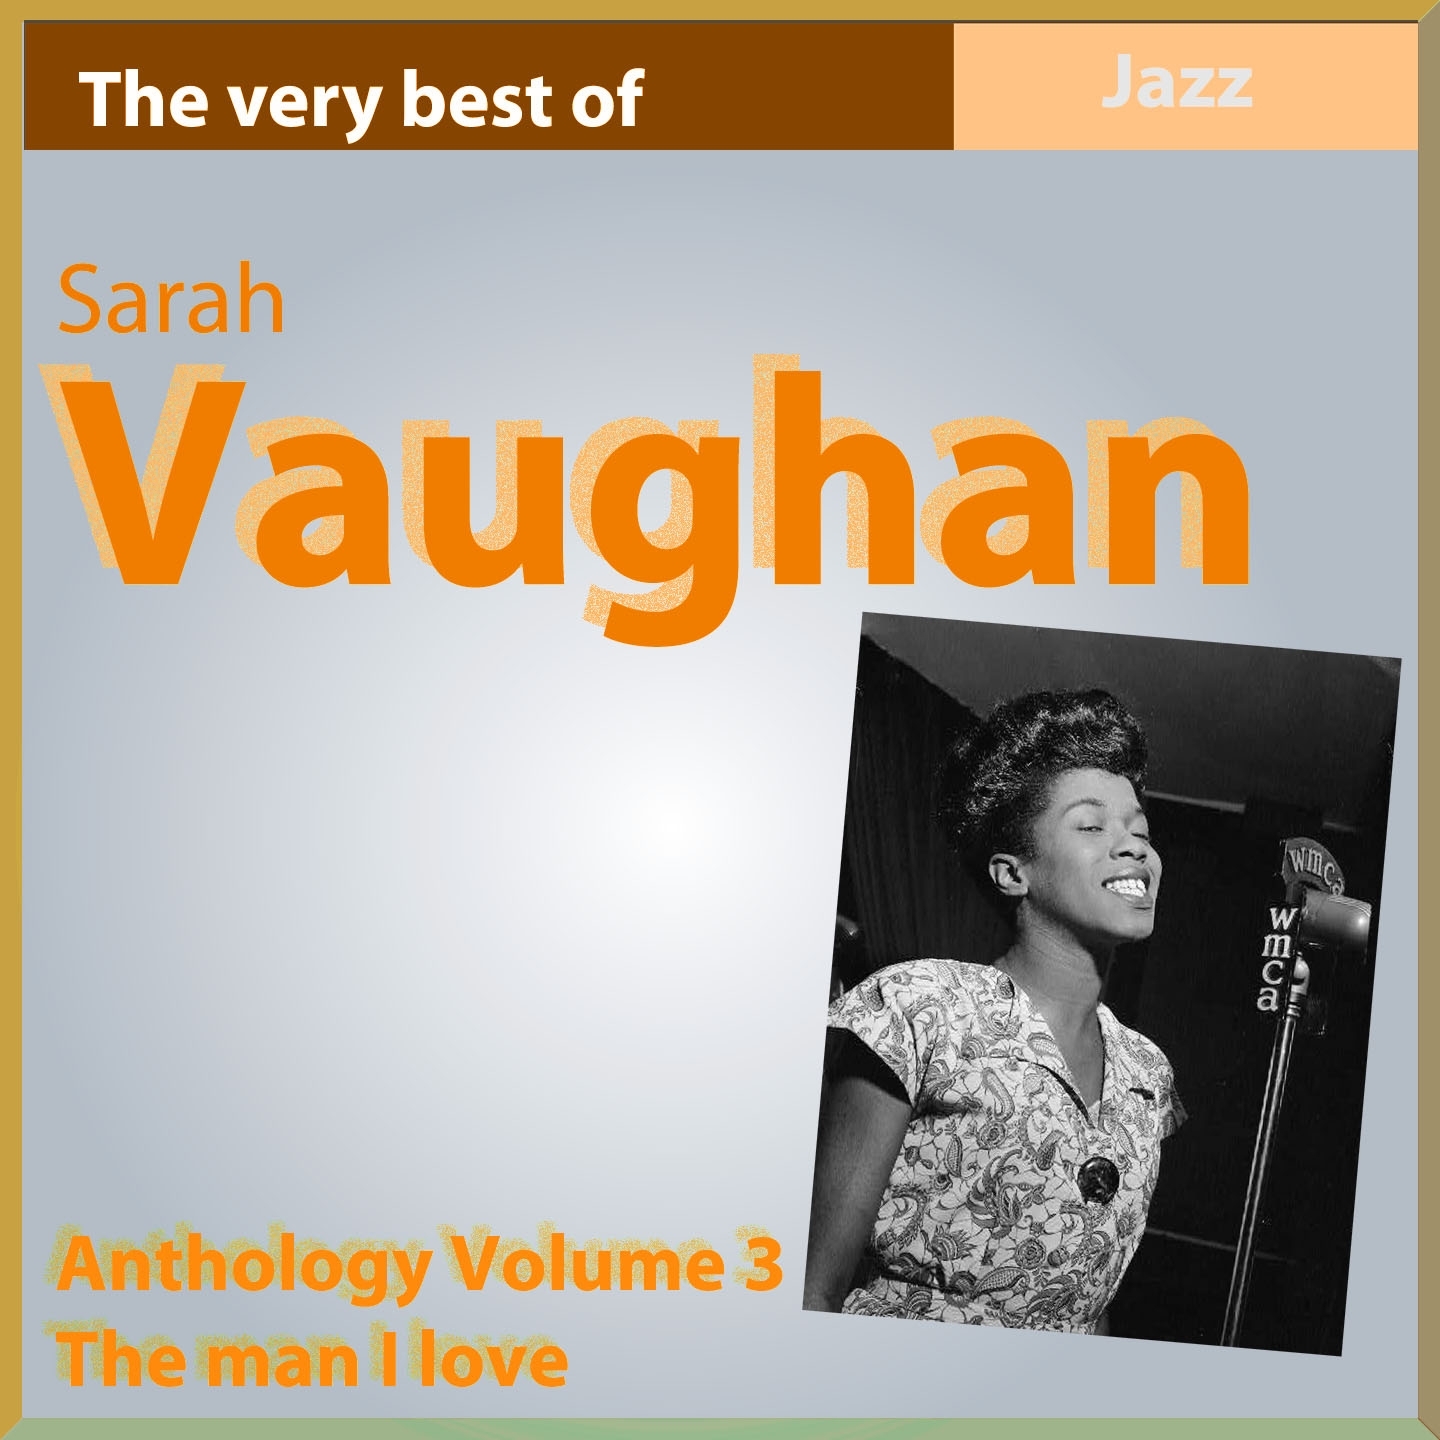 The Very Best of Sarah Vaughan: The Man I Love